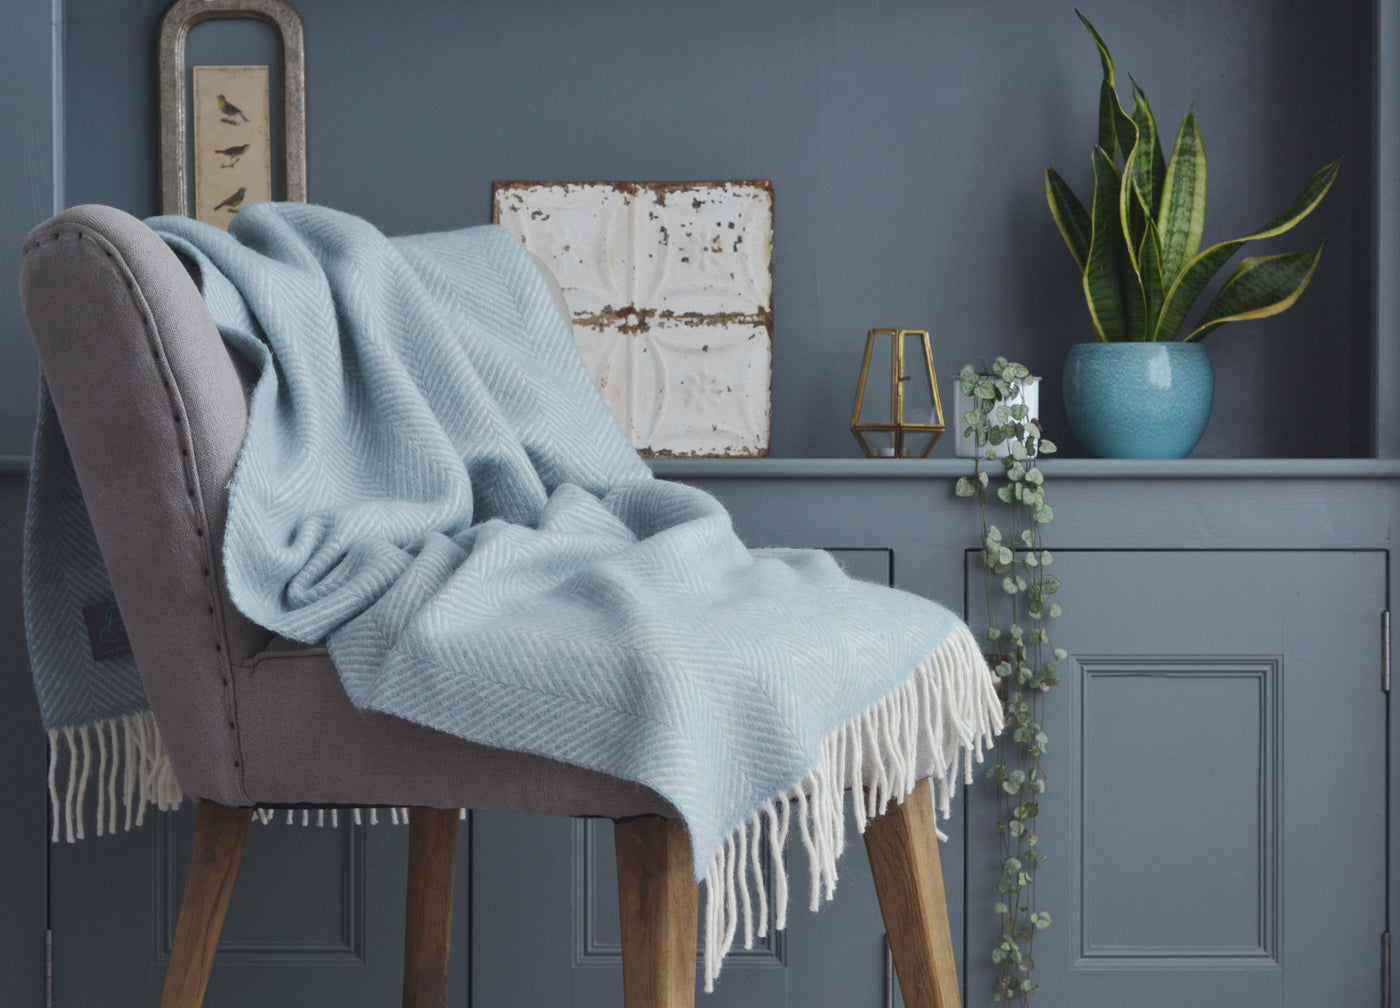 Extra large duck egg blue wool throw draped over a lounge chair